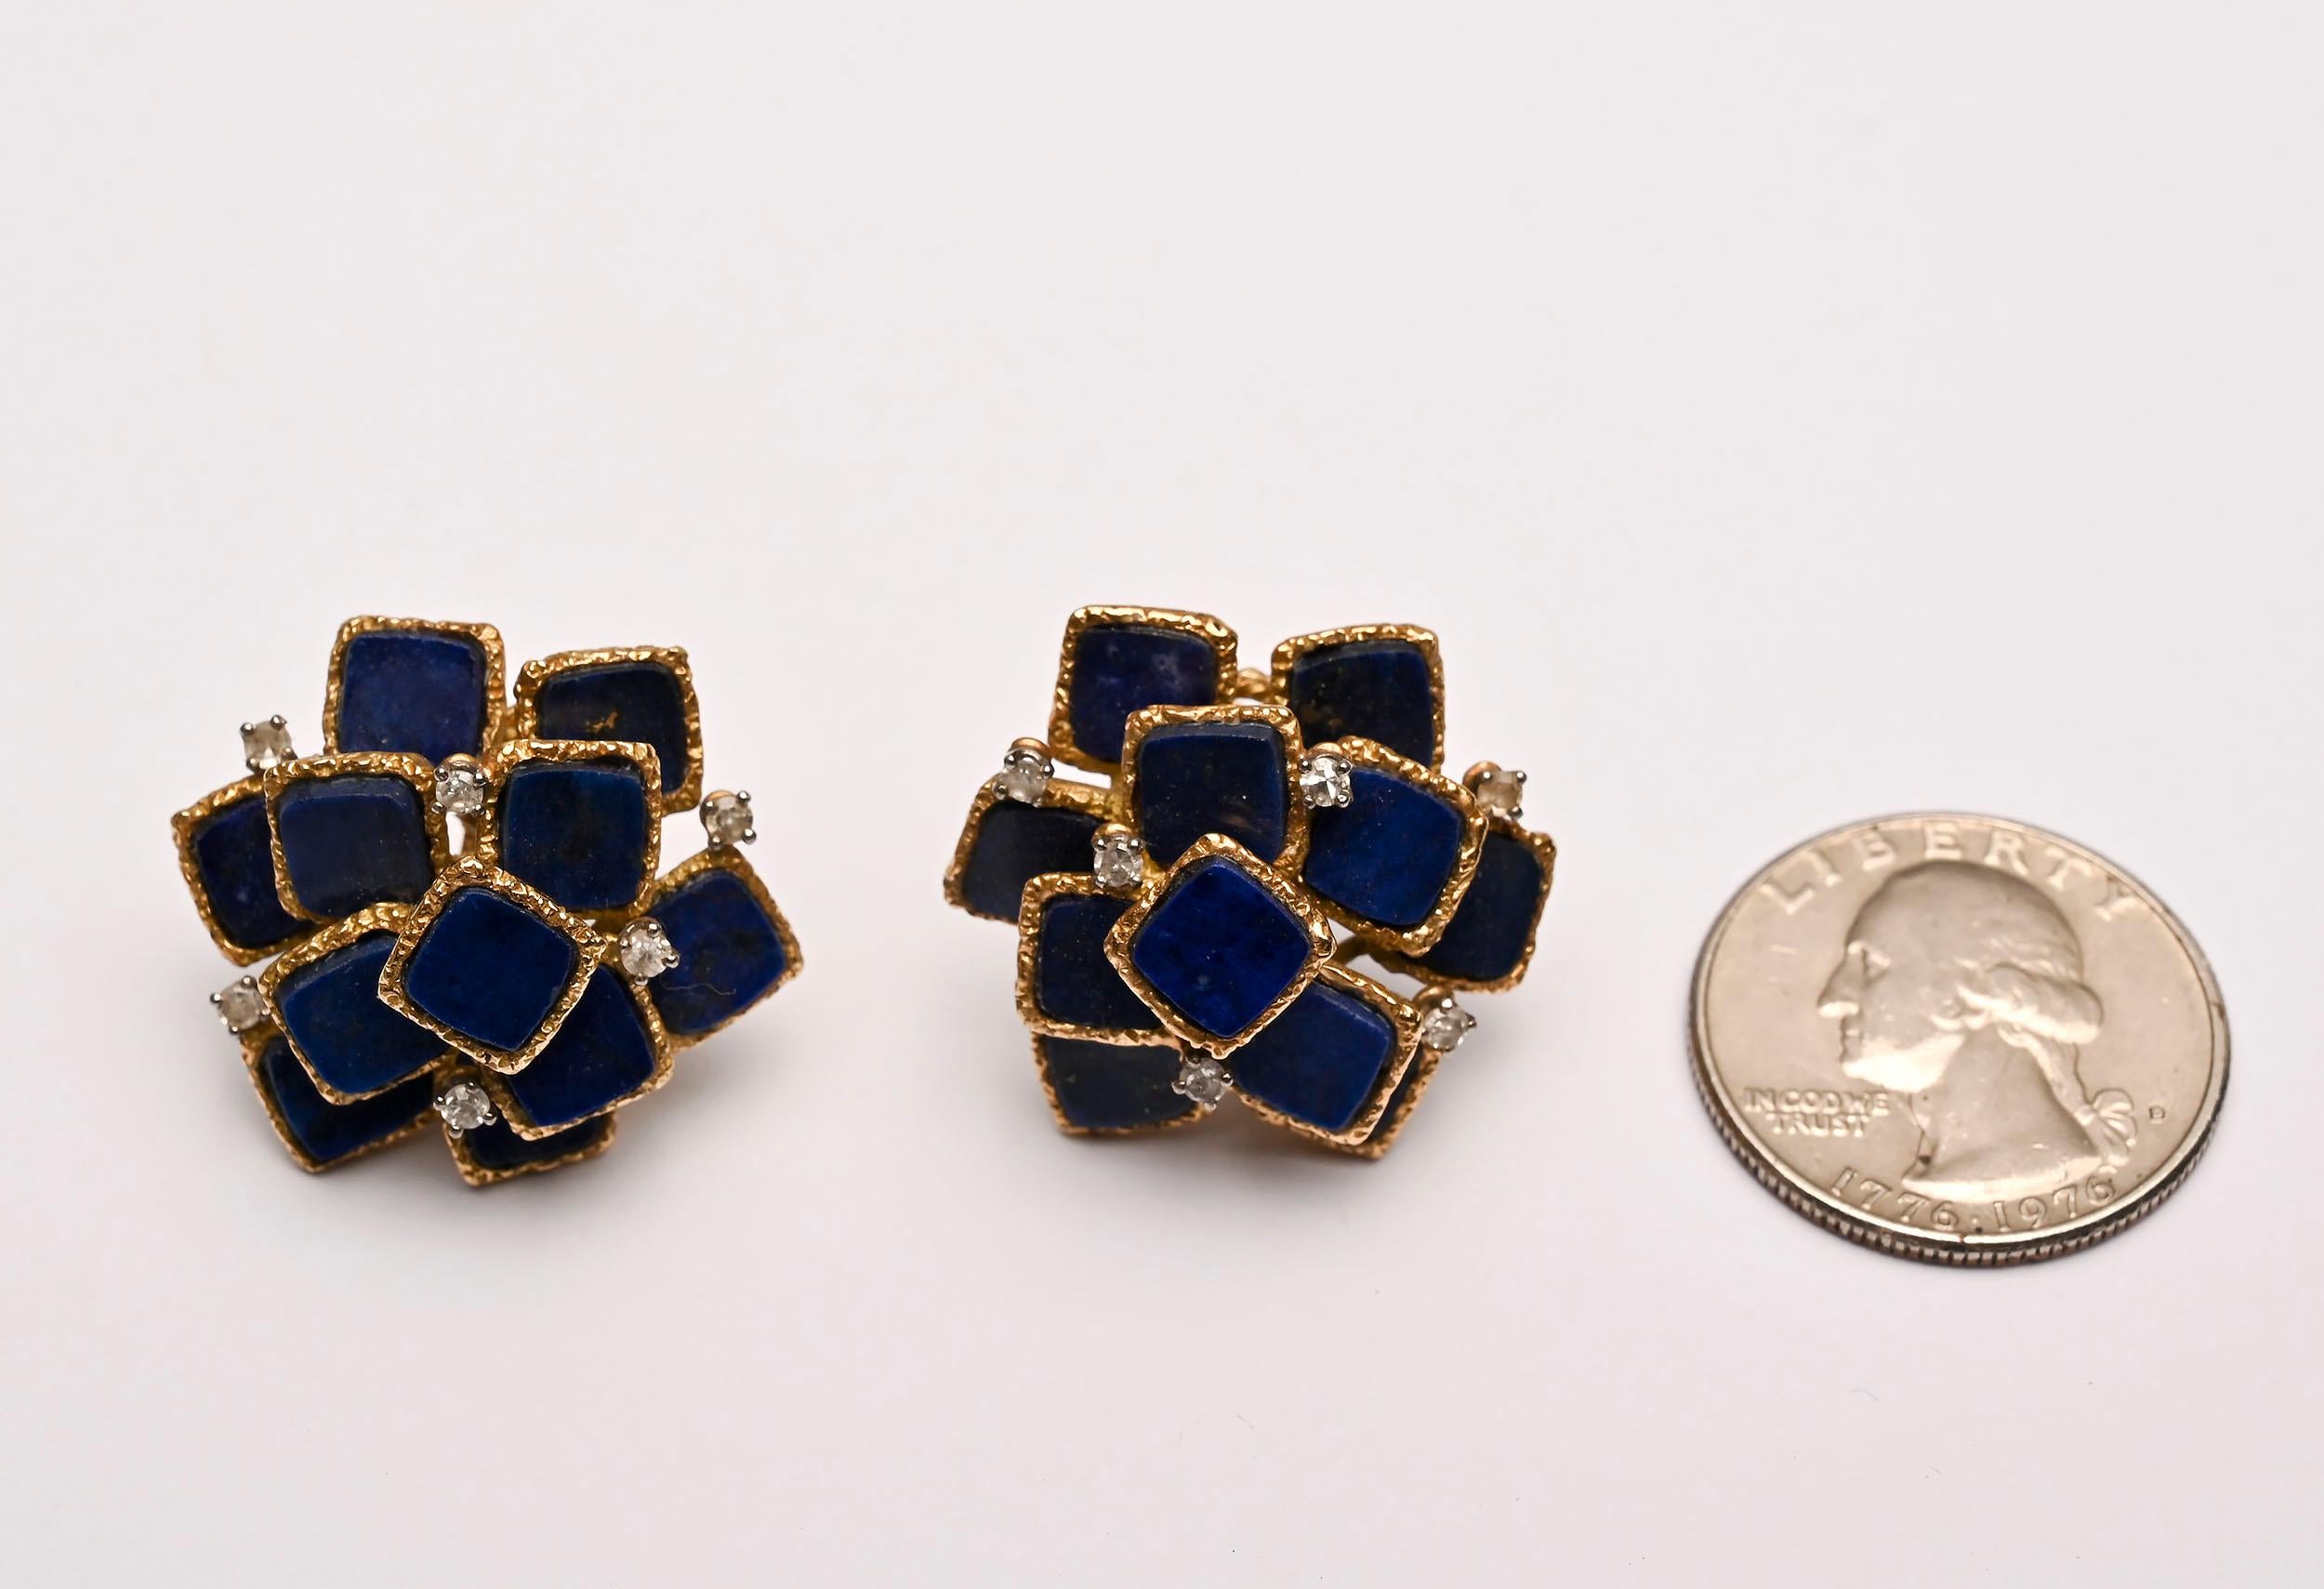 Eleven squares of lapis lazuli are set in a multi tiered arrangement in these earrings by J. Rossi. Each lapis stone is set in a textured gold band. Six diamonds weighing .05 carats each are set in each earring. Backs are posts and clips.